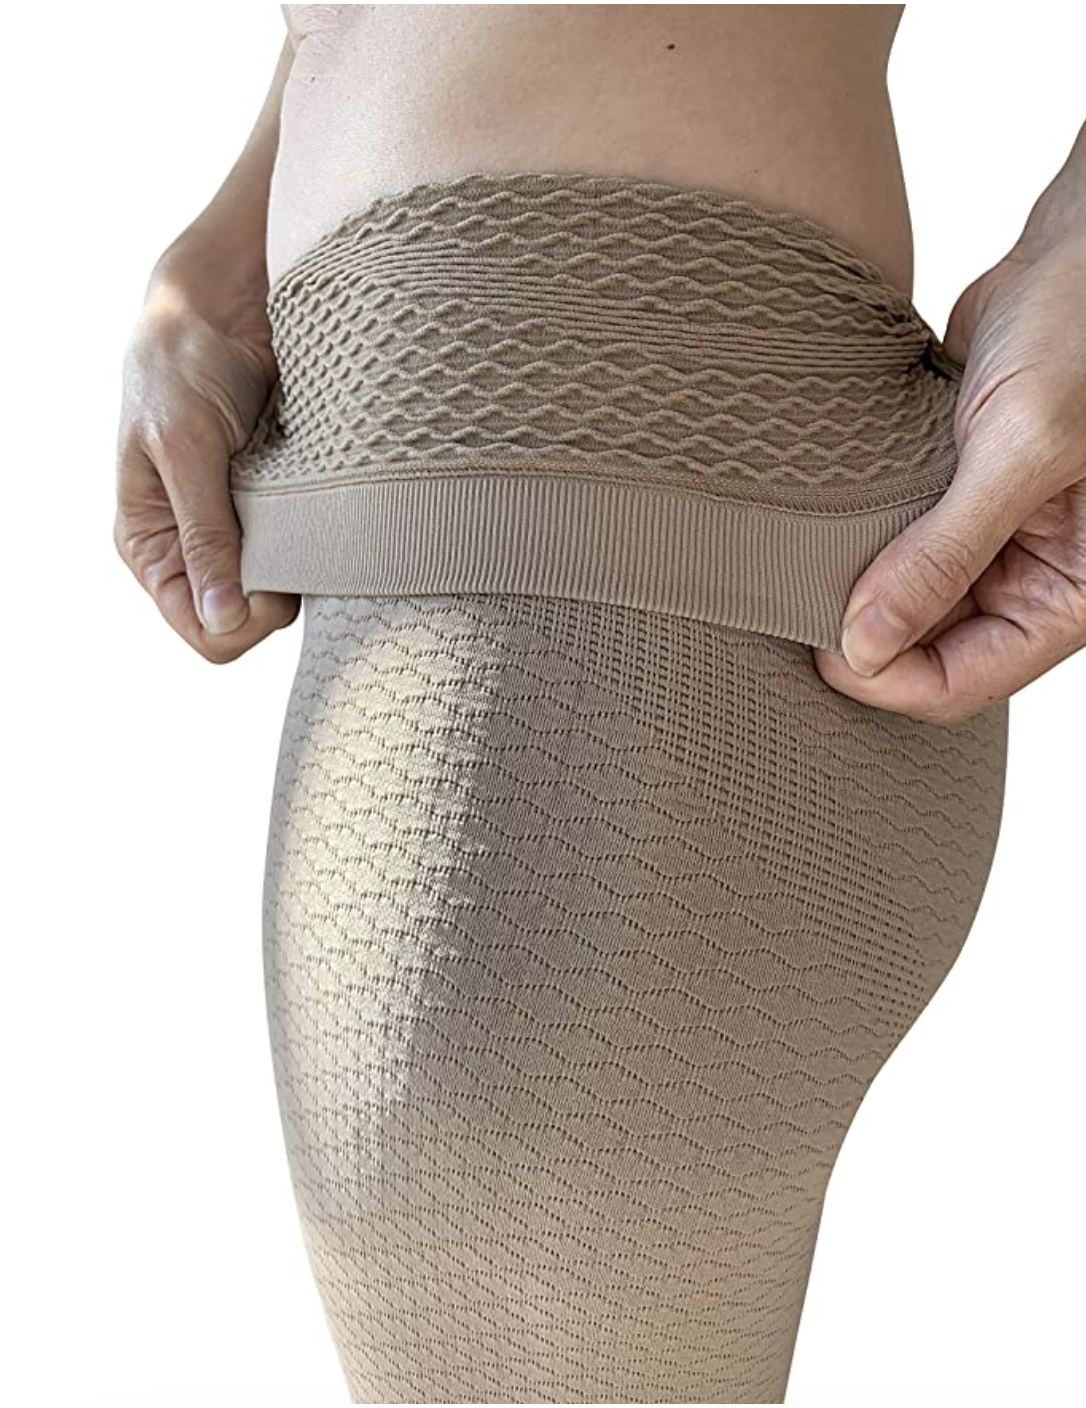 Bioflect® FIR Therapy Lymphedema Micromassage Compression Shorts